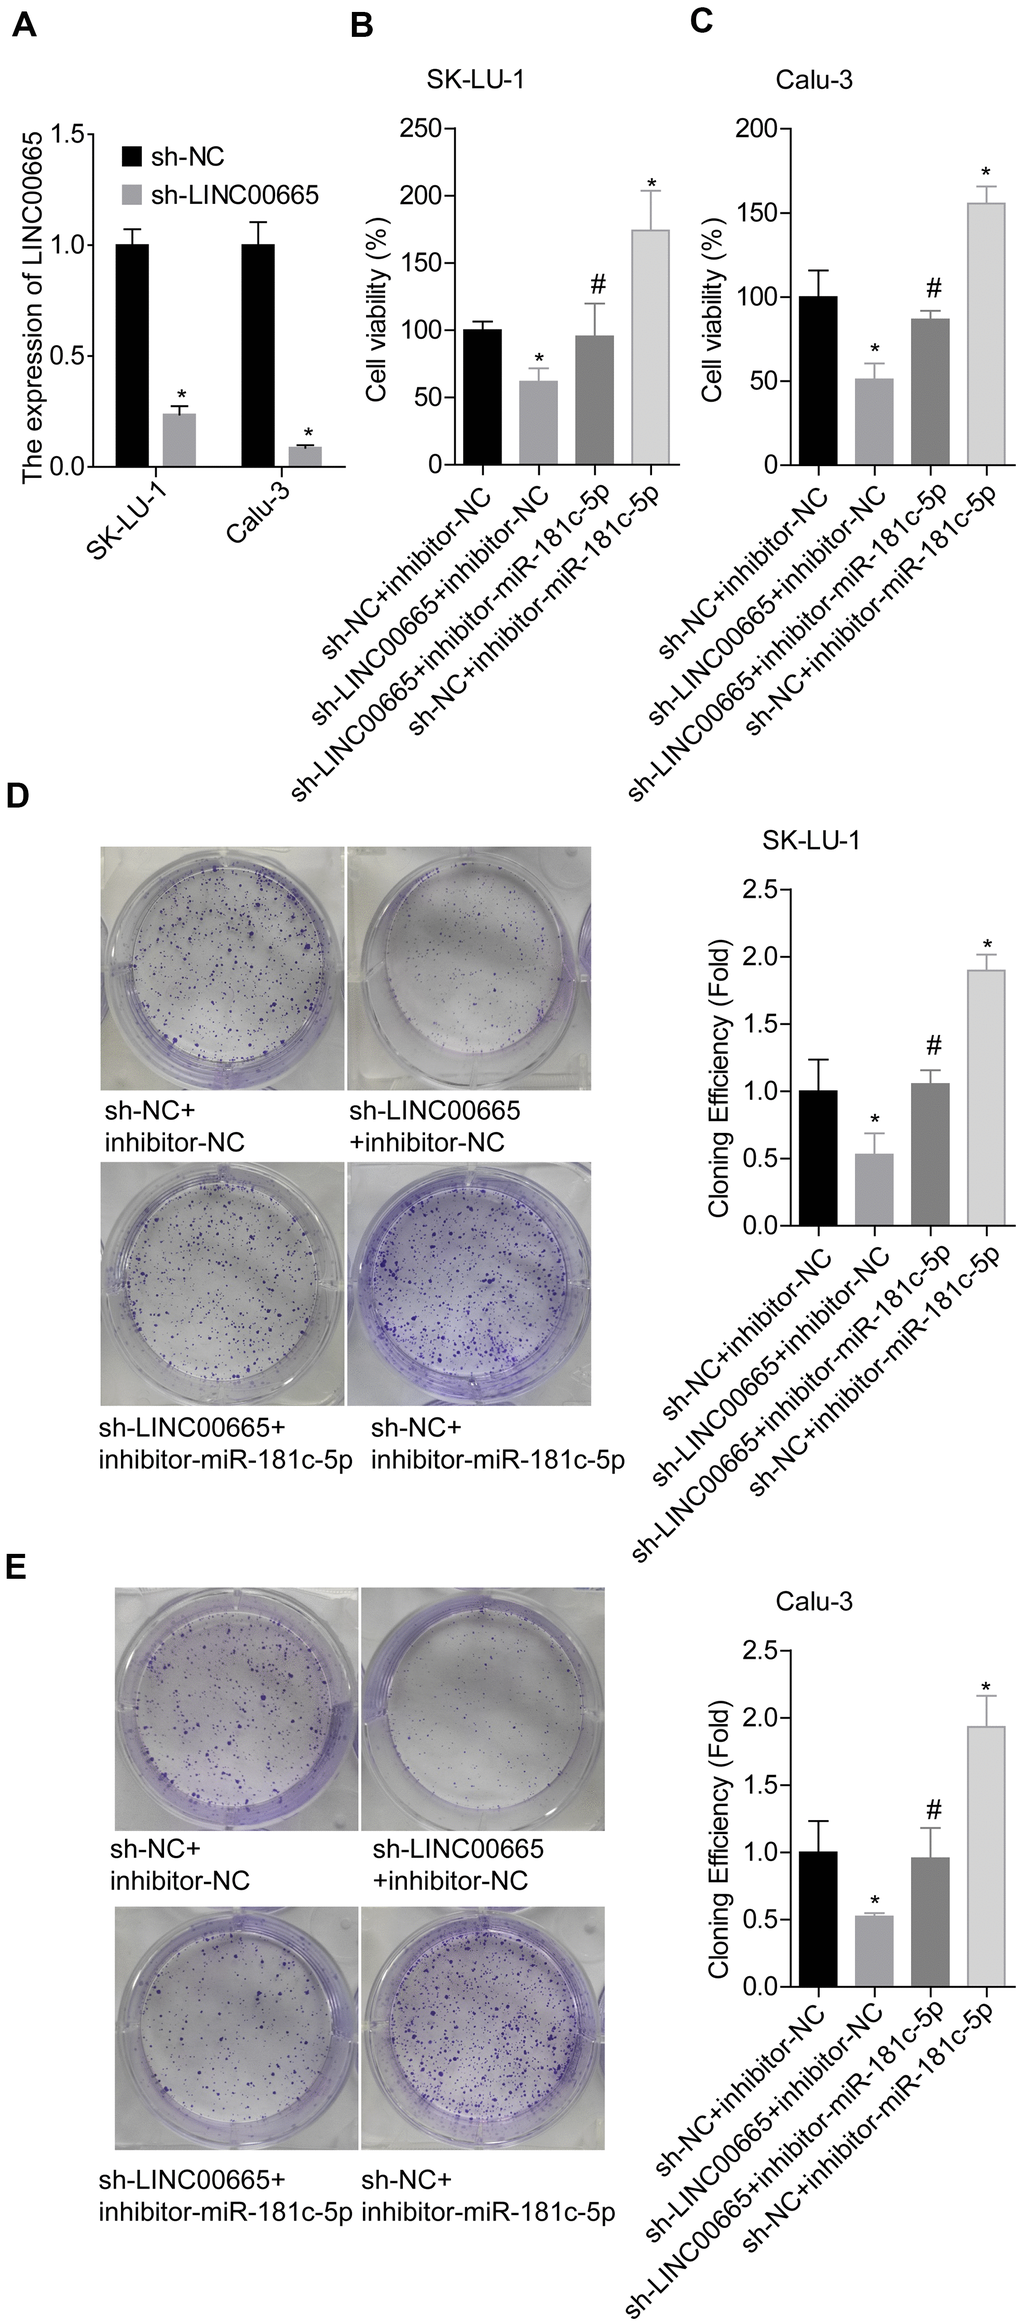 Assessment of the function of LINC00665/miR-181c-5p axis in modulating LUAD cell growth. (A) The expression of LINC00665 was detected by RT-PCR after sh-LINC00665 was stably transfected into SK-LU-1 and Calu-3 cells. Stably transfected SK-LU-1 and Calu-3 cells (sh-NC + inhibitor-NC, sh-LINC00665 + inhibitor-NC, sh-LINC00665 + inhibitor-miR-181c-5p, sh-NC + inhibitor-miR-181c-5p) were collected and subjected to the following assays. (B, C) Cell viability was assessed by CCK-8 assay. (D, E) Cell clone formation was detected by clone formation assay. (*p0.05, vs. sh-NC + inhibitor-NC group; #p0.05, vs. sh-LINC00665 + inhibitor-NC group).